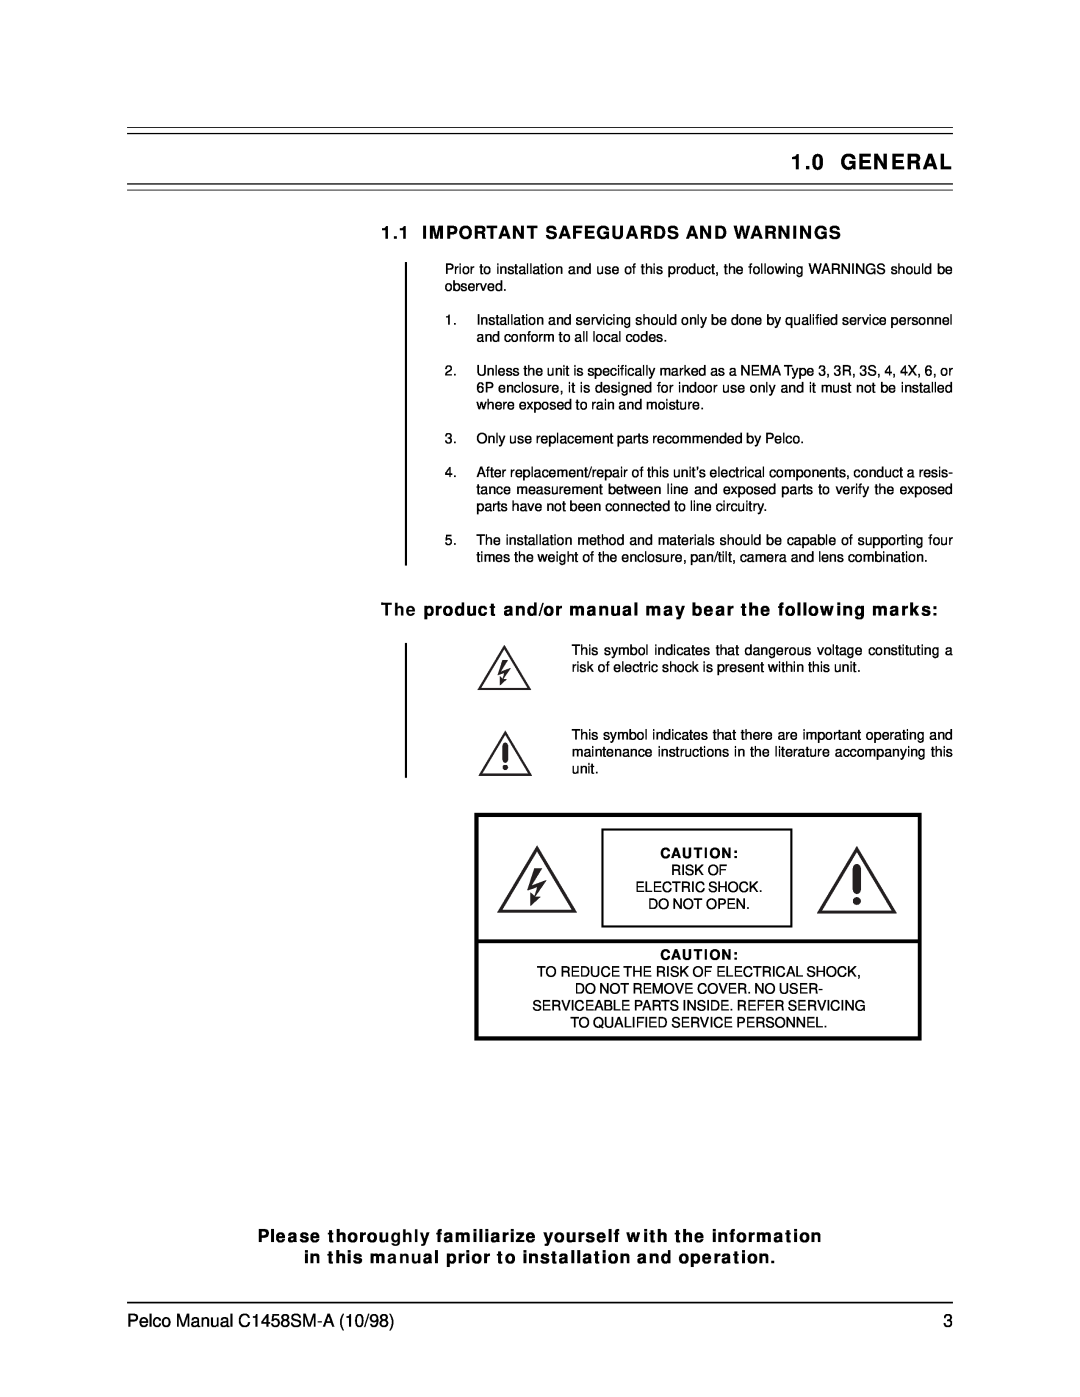 Pelco DF5S service manual General, Important Safeguards And Warnings, Pelco Manual C1458SM-A10/98 